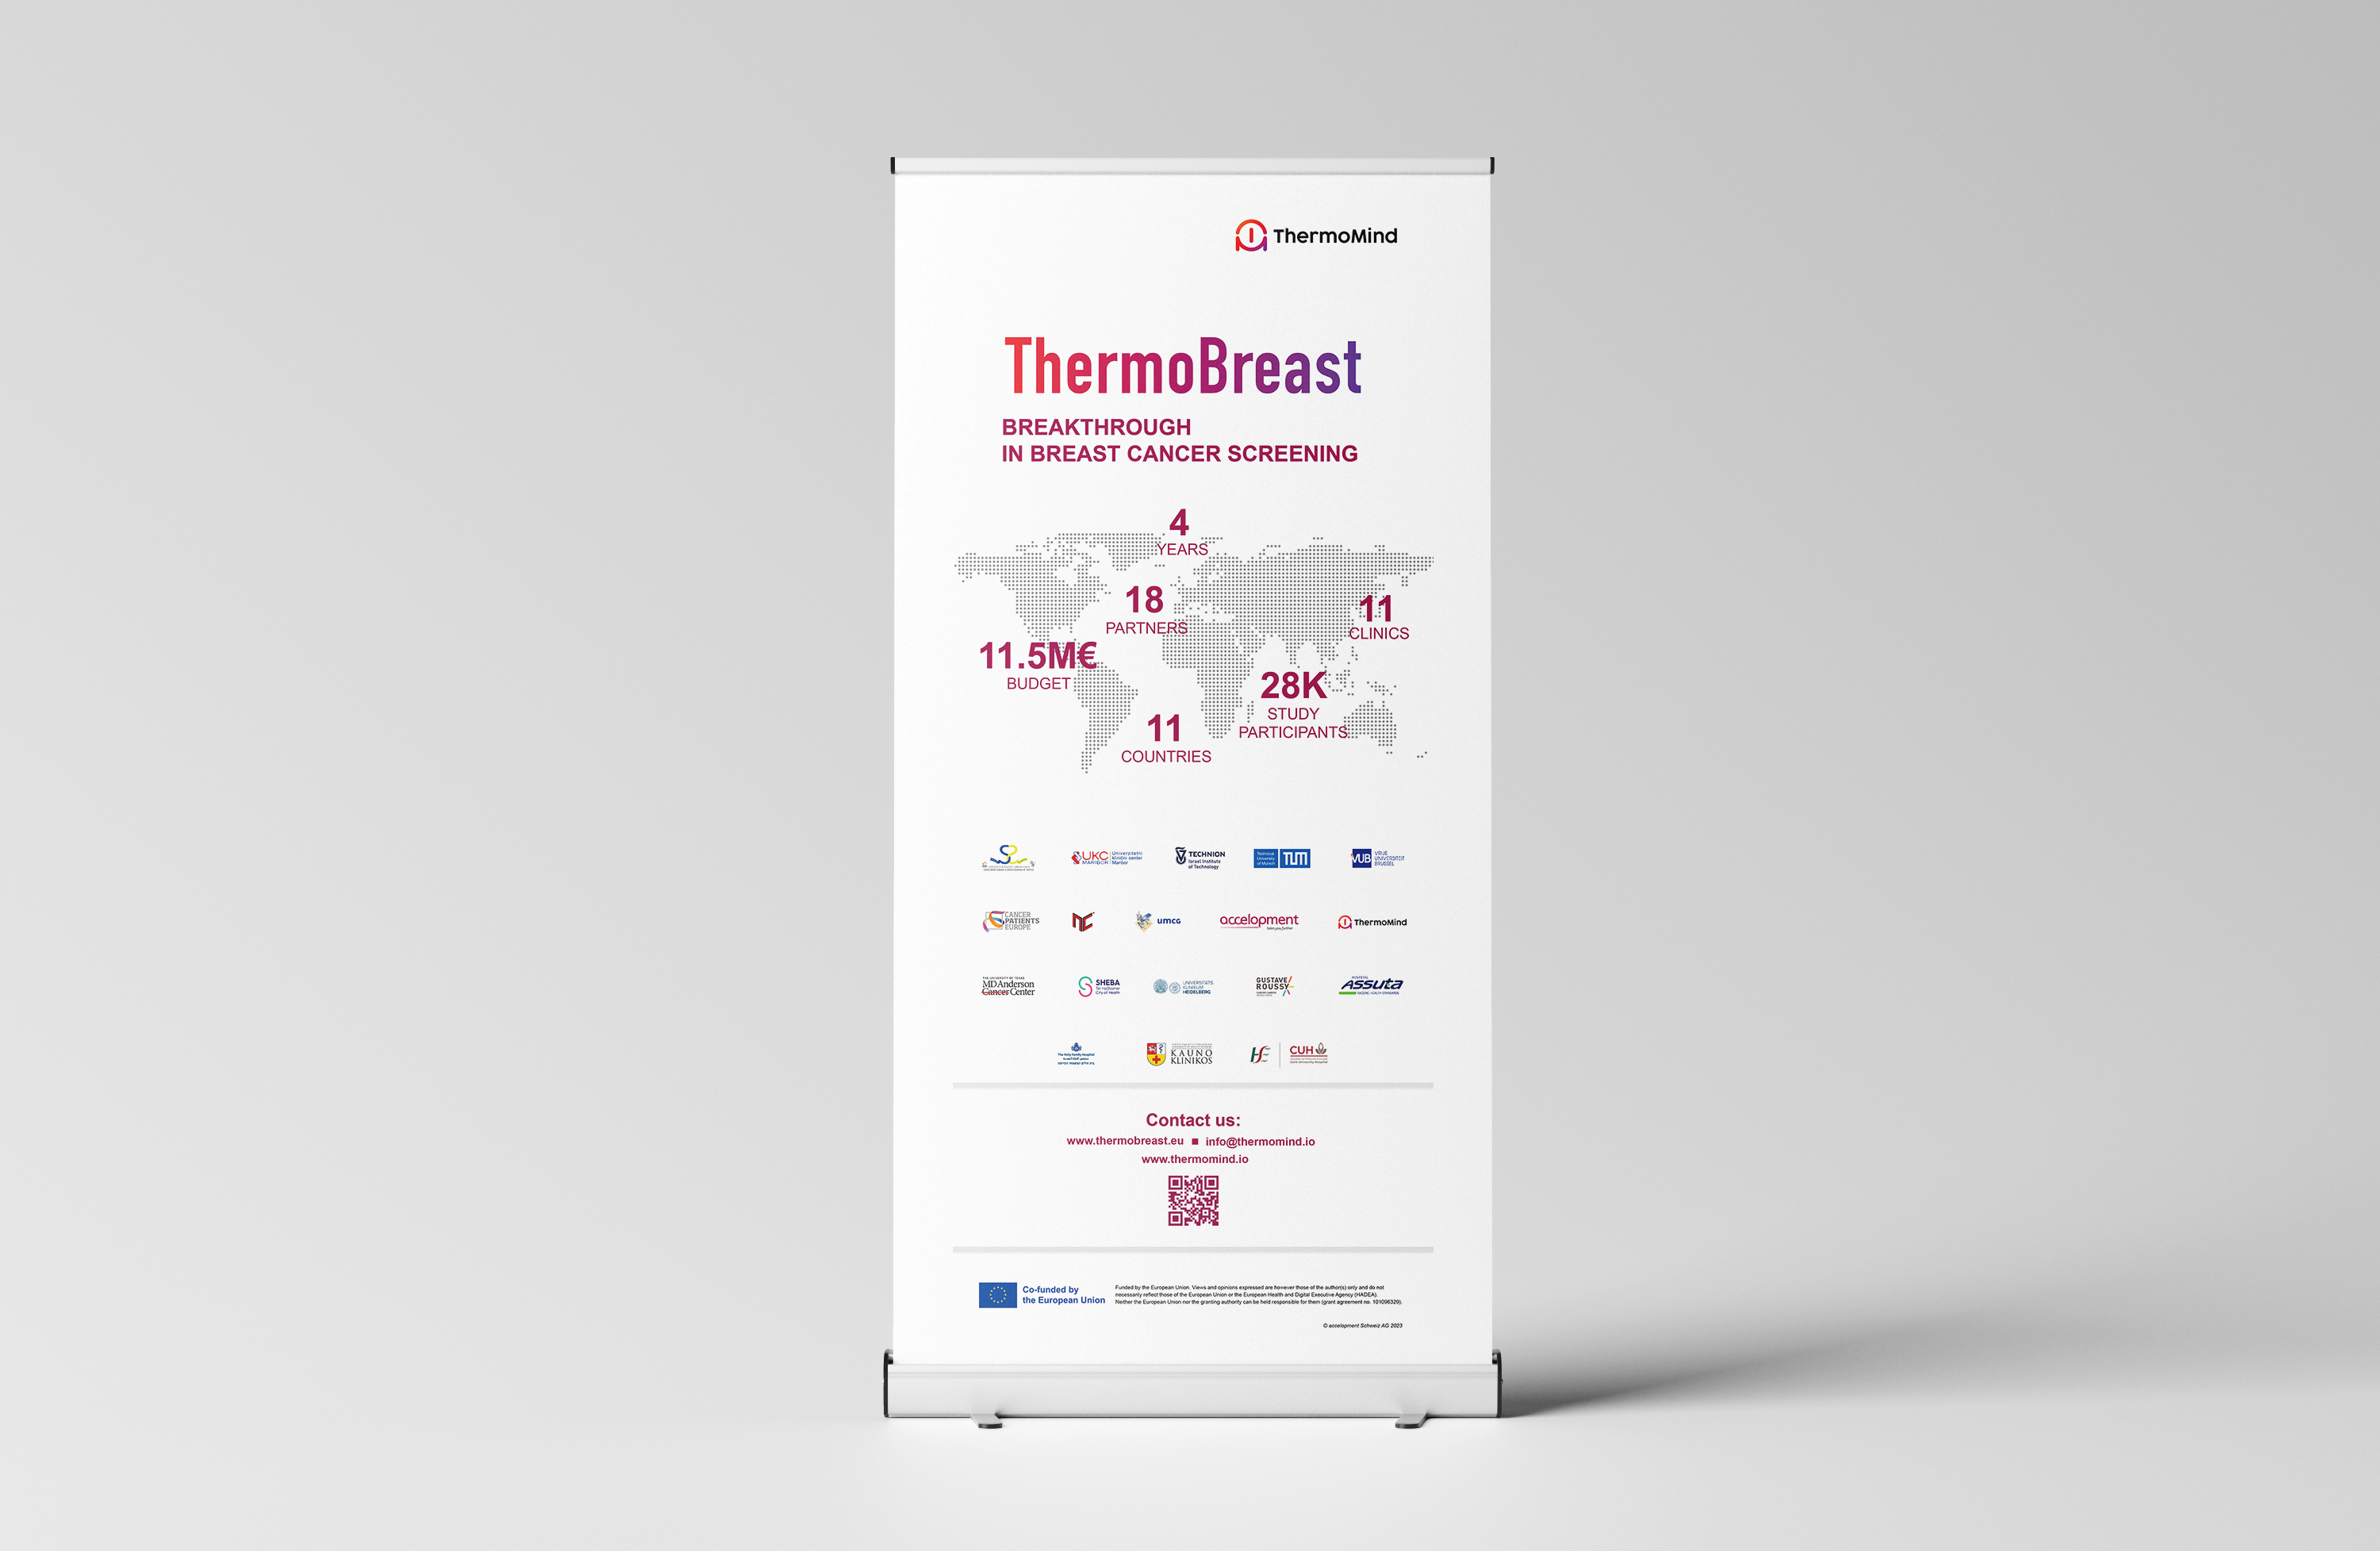 image depicting Thermobreast roll-up banner